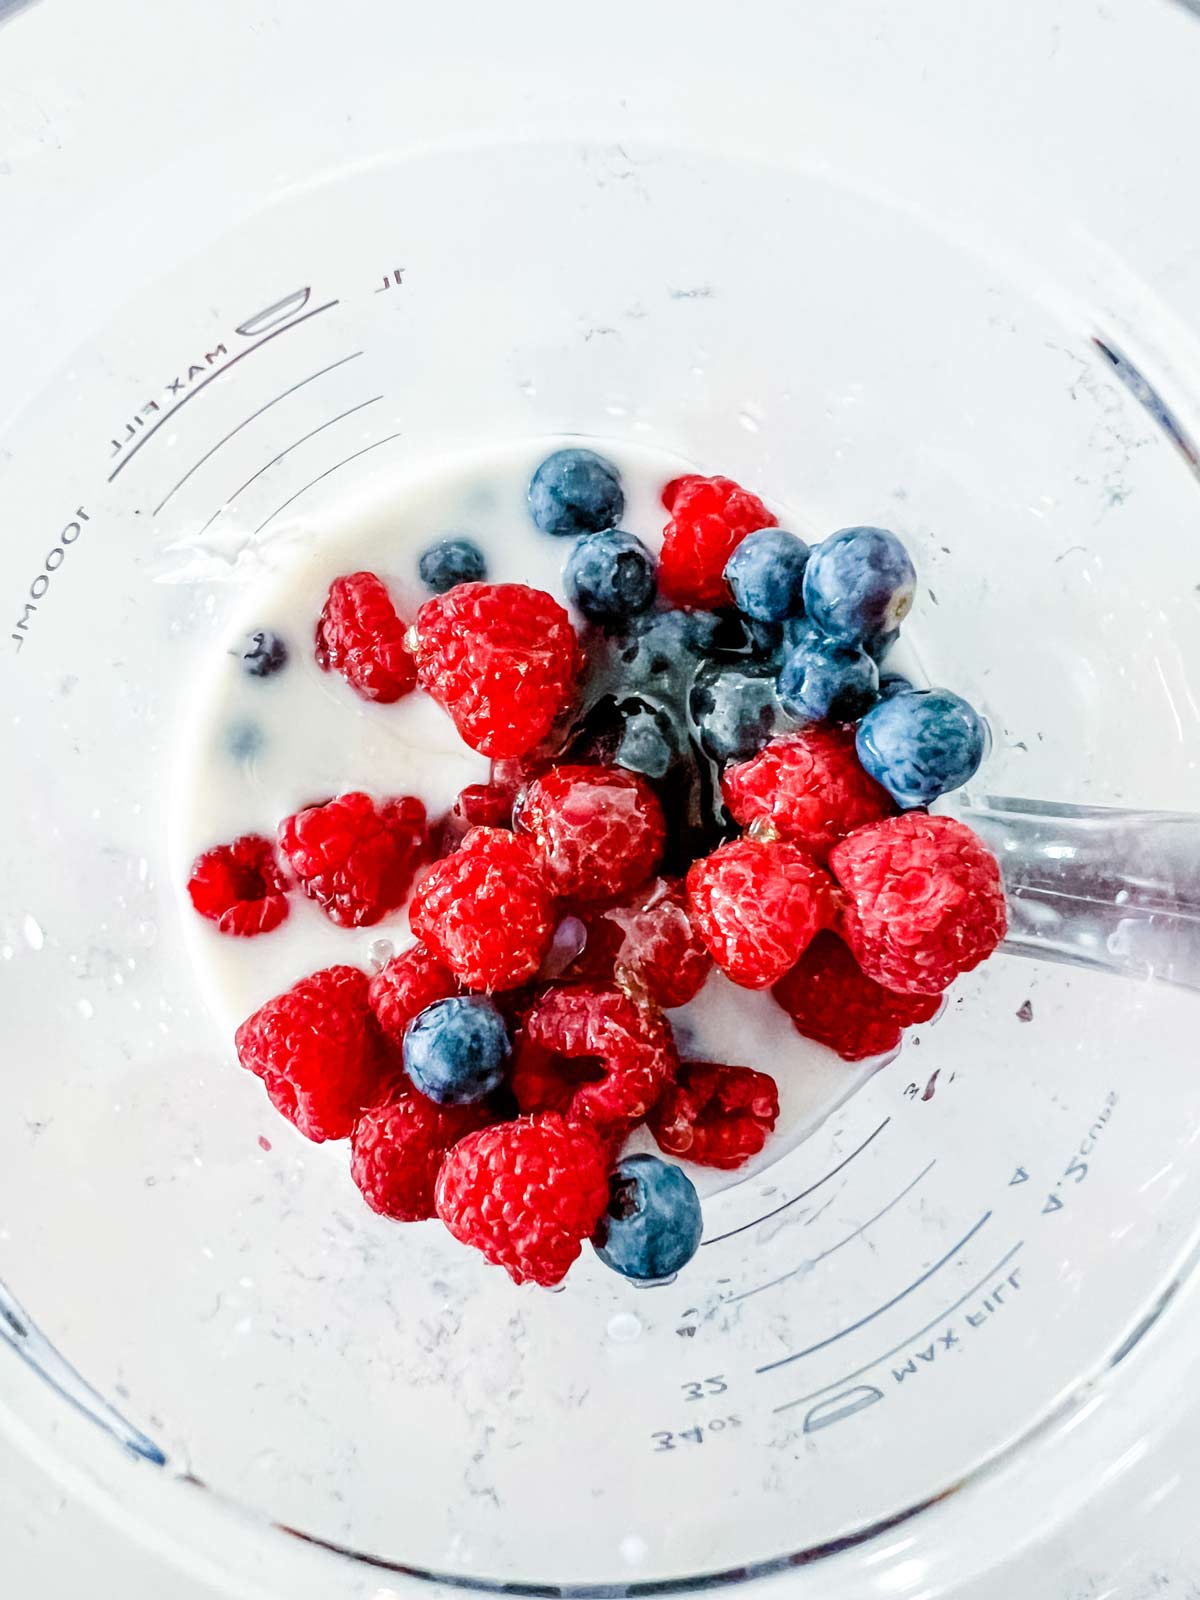 Milk, yogurt, vanilla, honey, raspberries and blueberries ready to be blended for a smoothie.